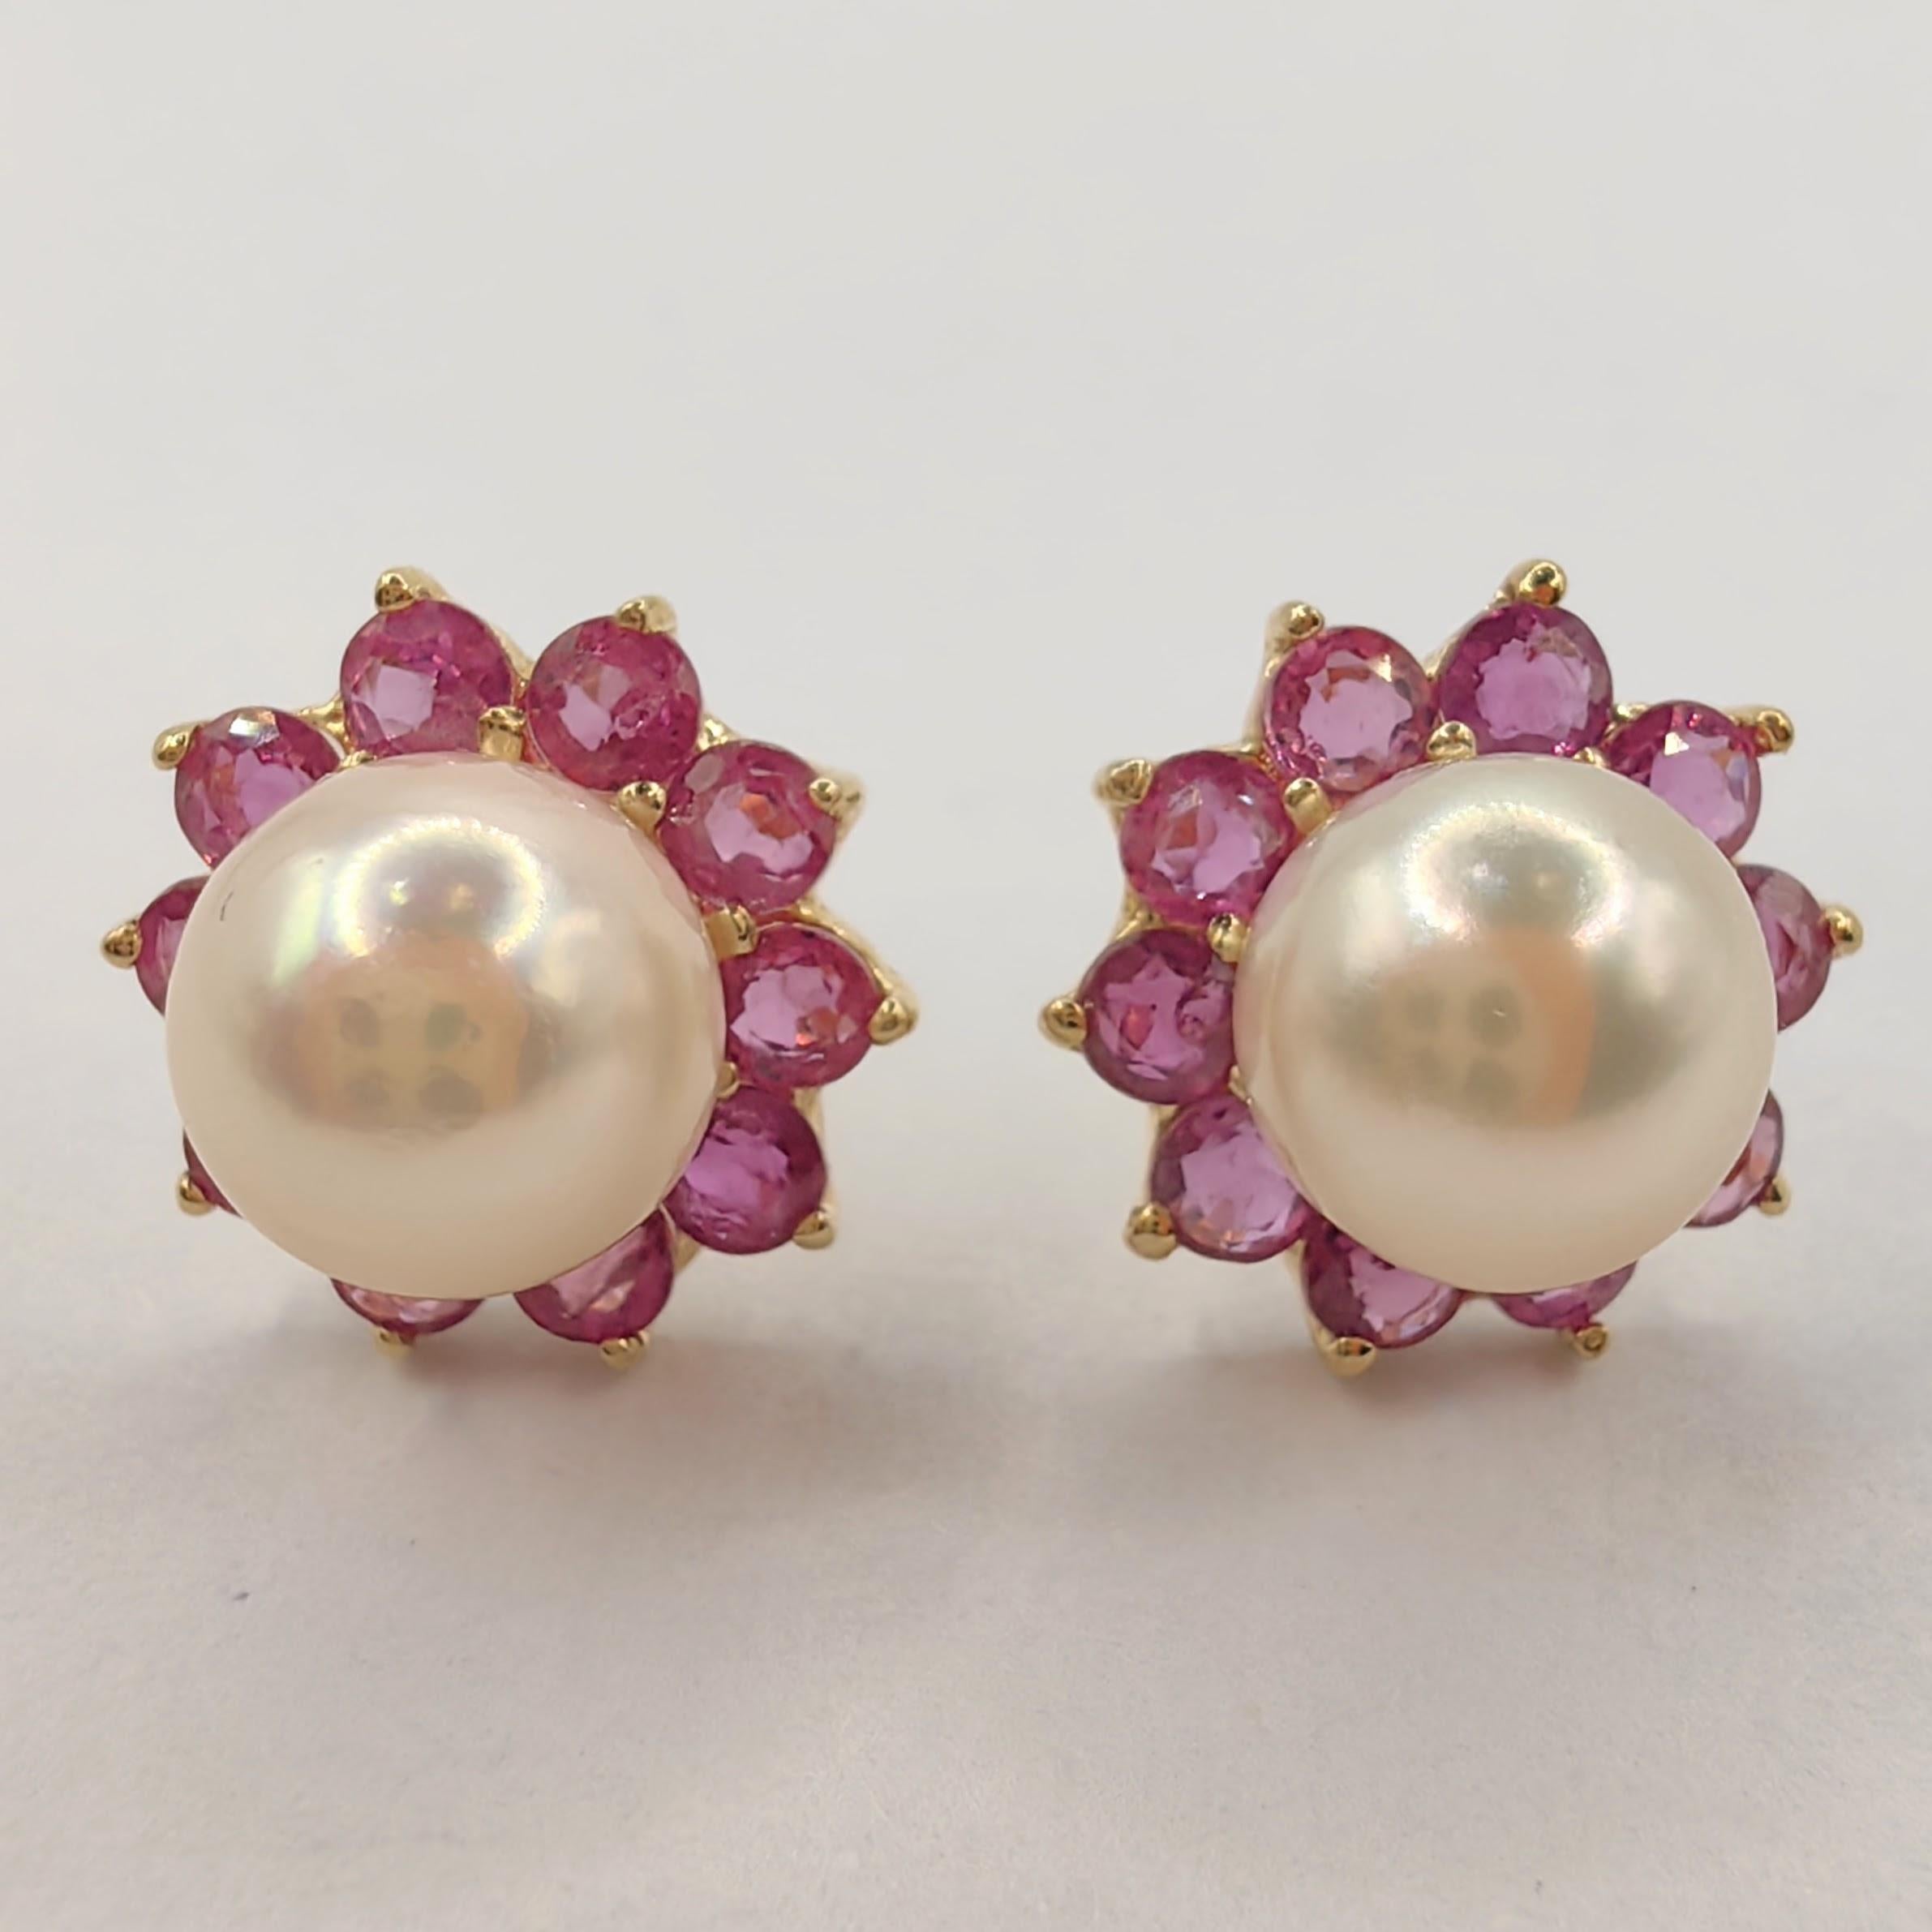 Contemporary Vintage 1980's Pearl Stud & 0.80 Carat Ruby Jacket Earrings in 14k Yellow Gold For Sale